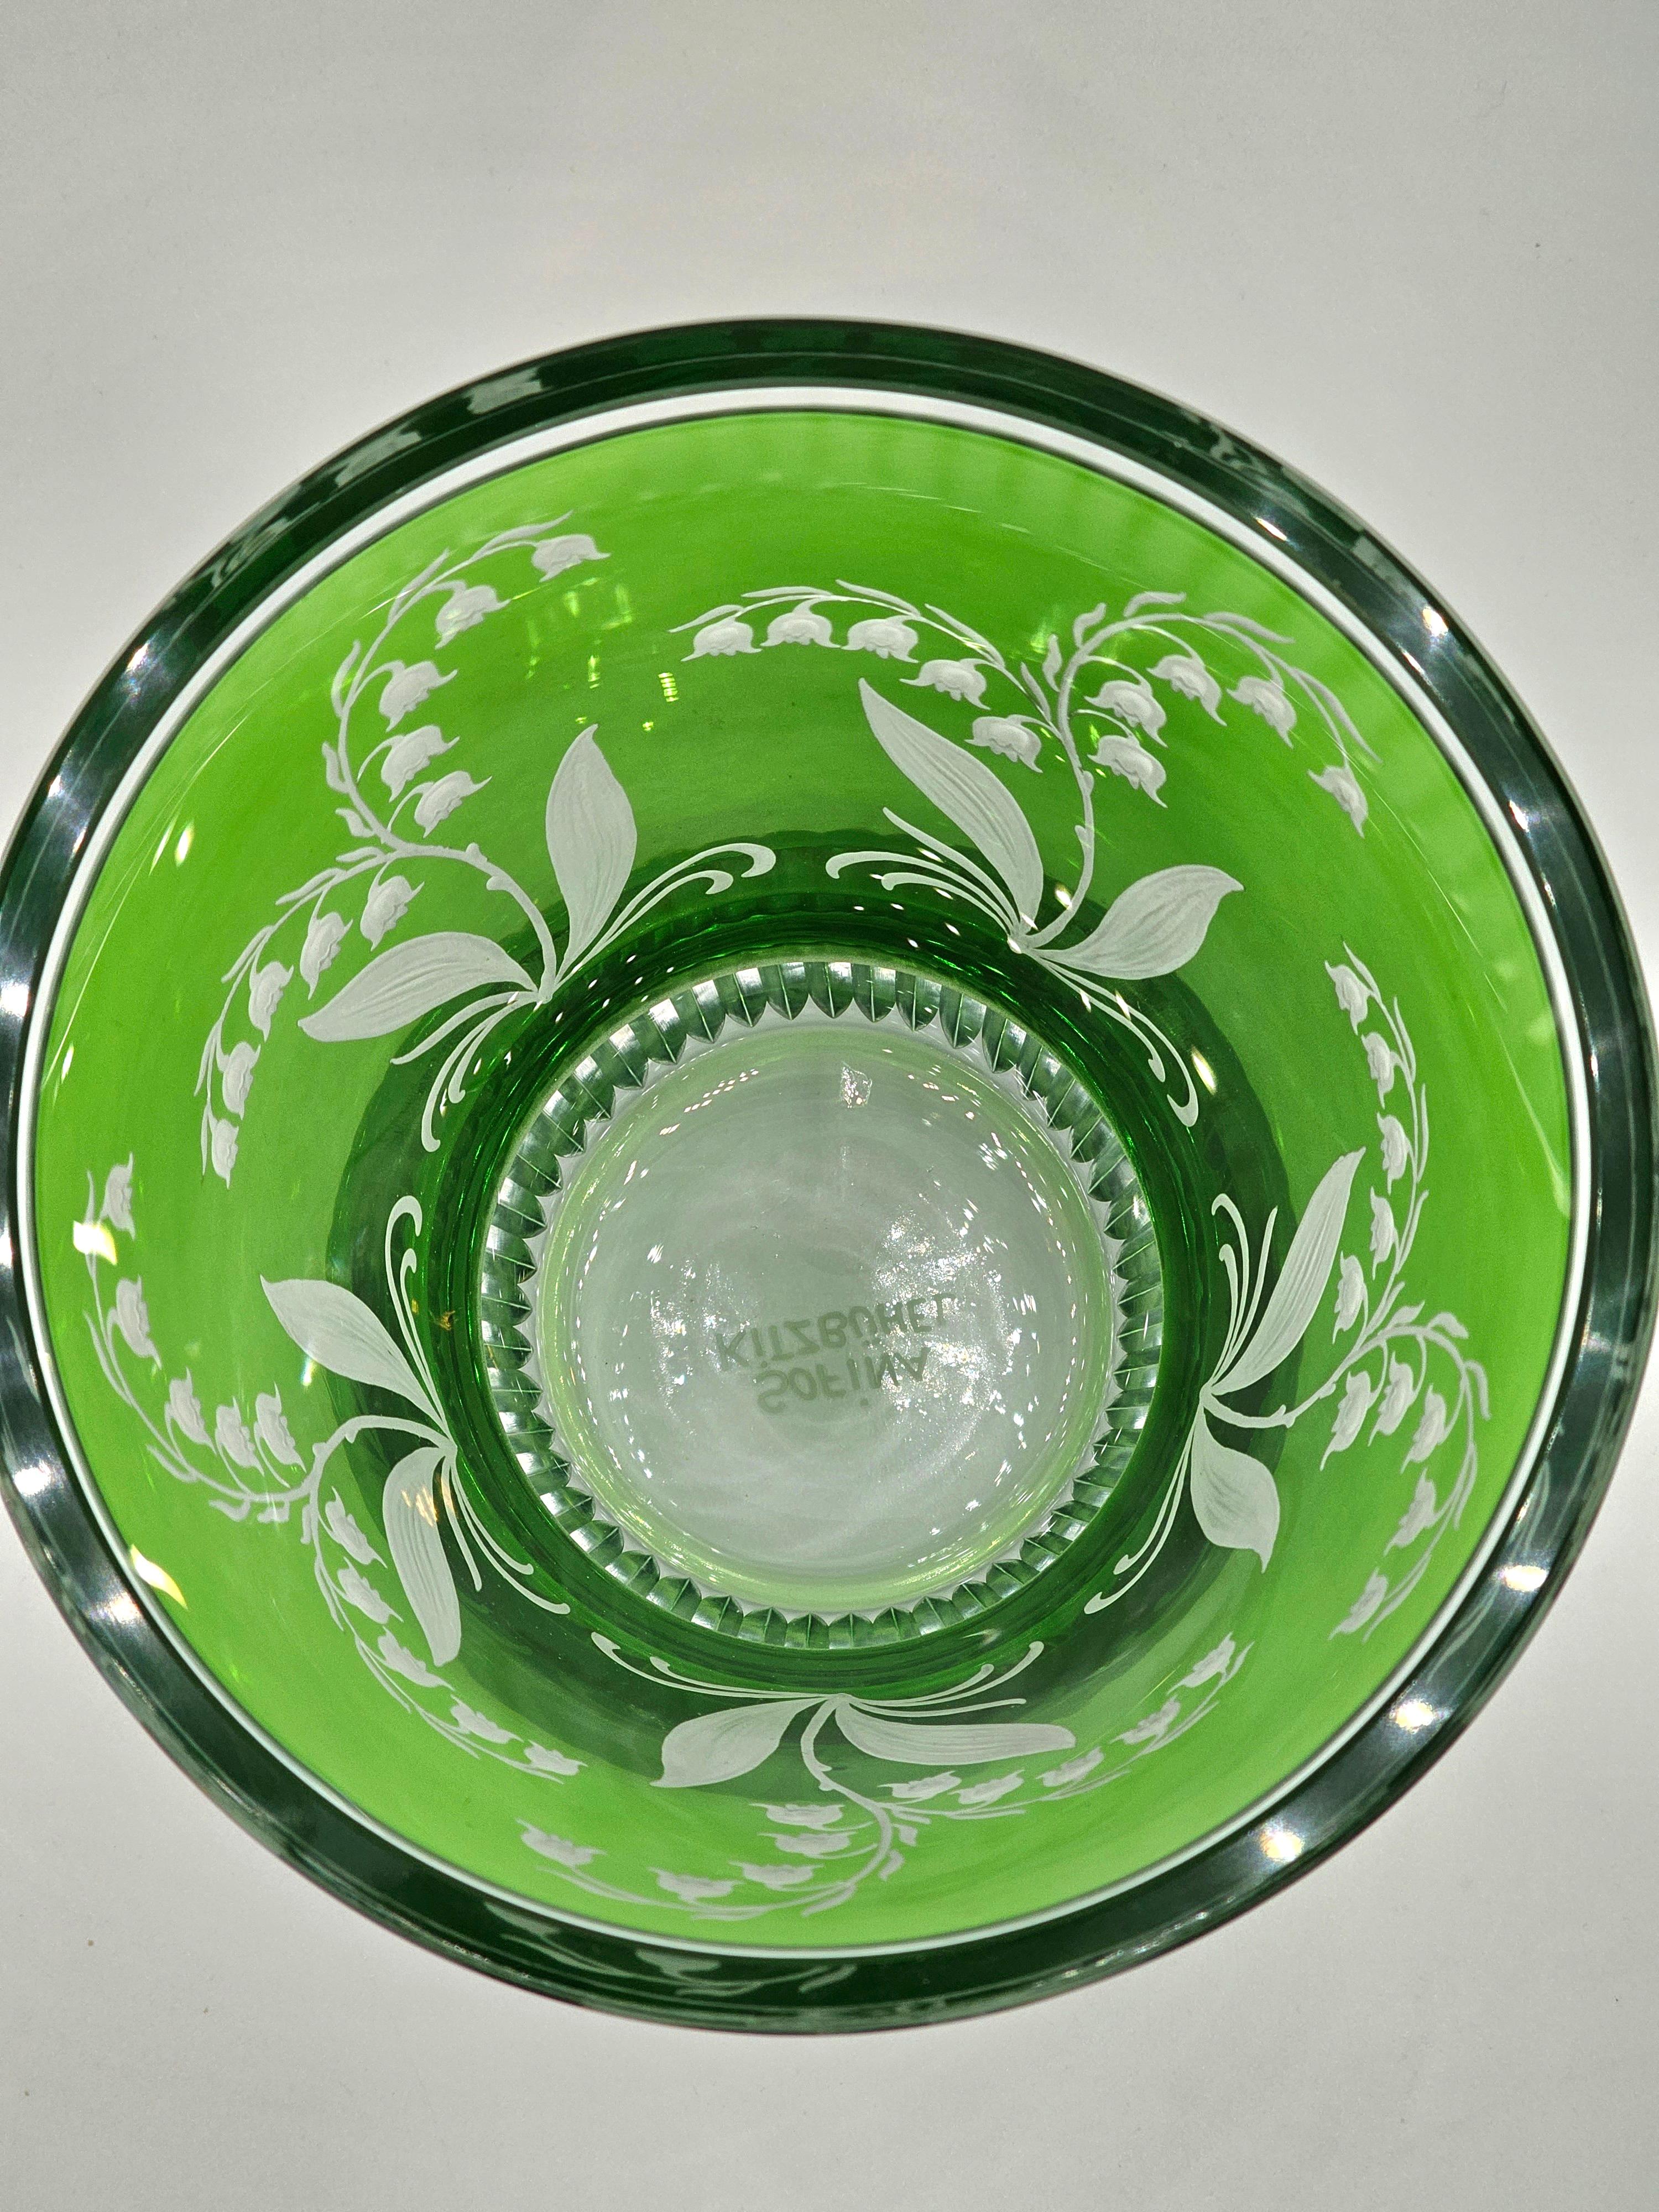 Hand blown crystal vase/laterne in green colored glass with a lily of the valley decor all around. The decor is hands free engraved by artists and the bottom of the glass is hand carved. The glass here shown in green color can be ordered in